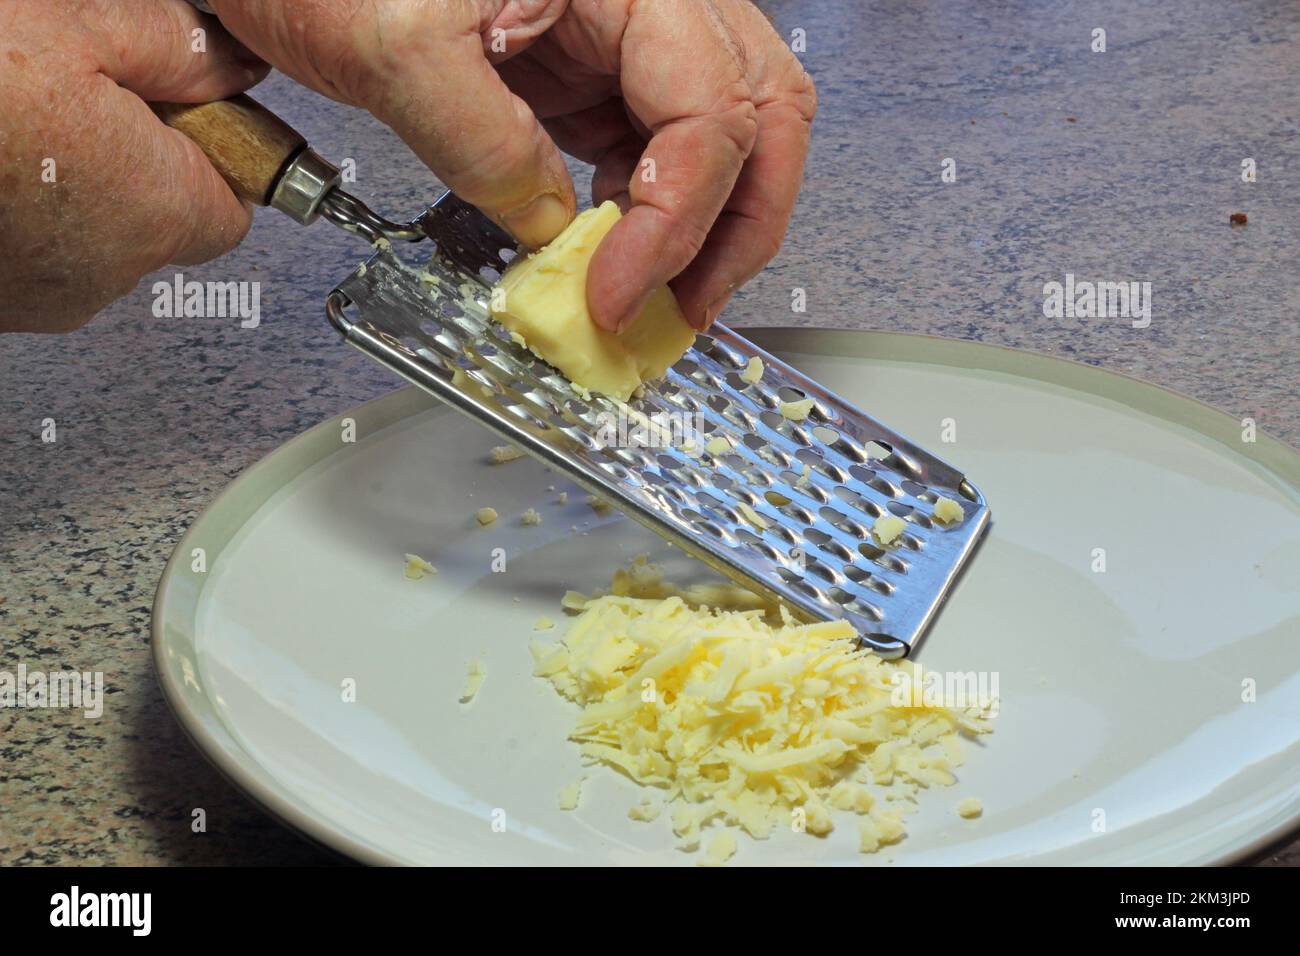 https://c8.alamy.com/comp/2KM3JPD/hand-grating-cheese-with-a-cheese-grater-onto-a-plate-2KM3JPD.jpg